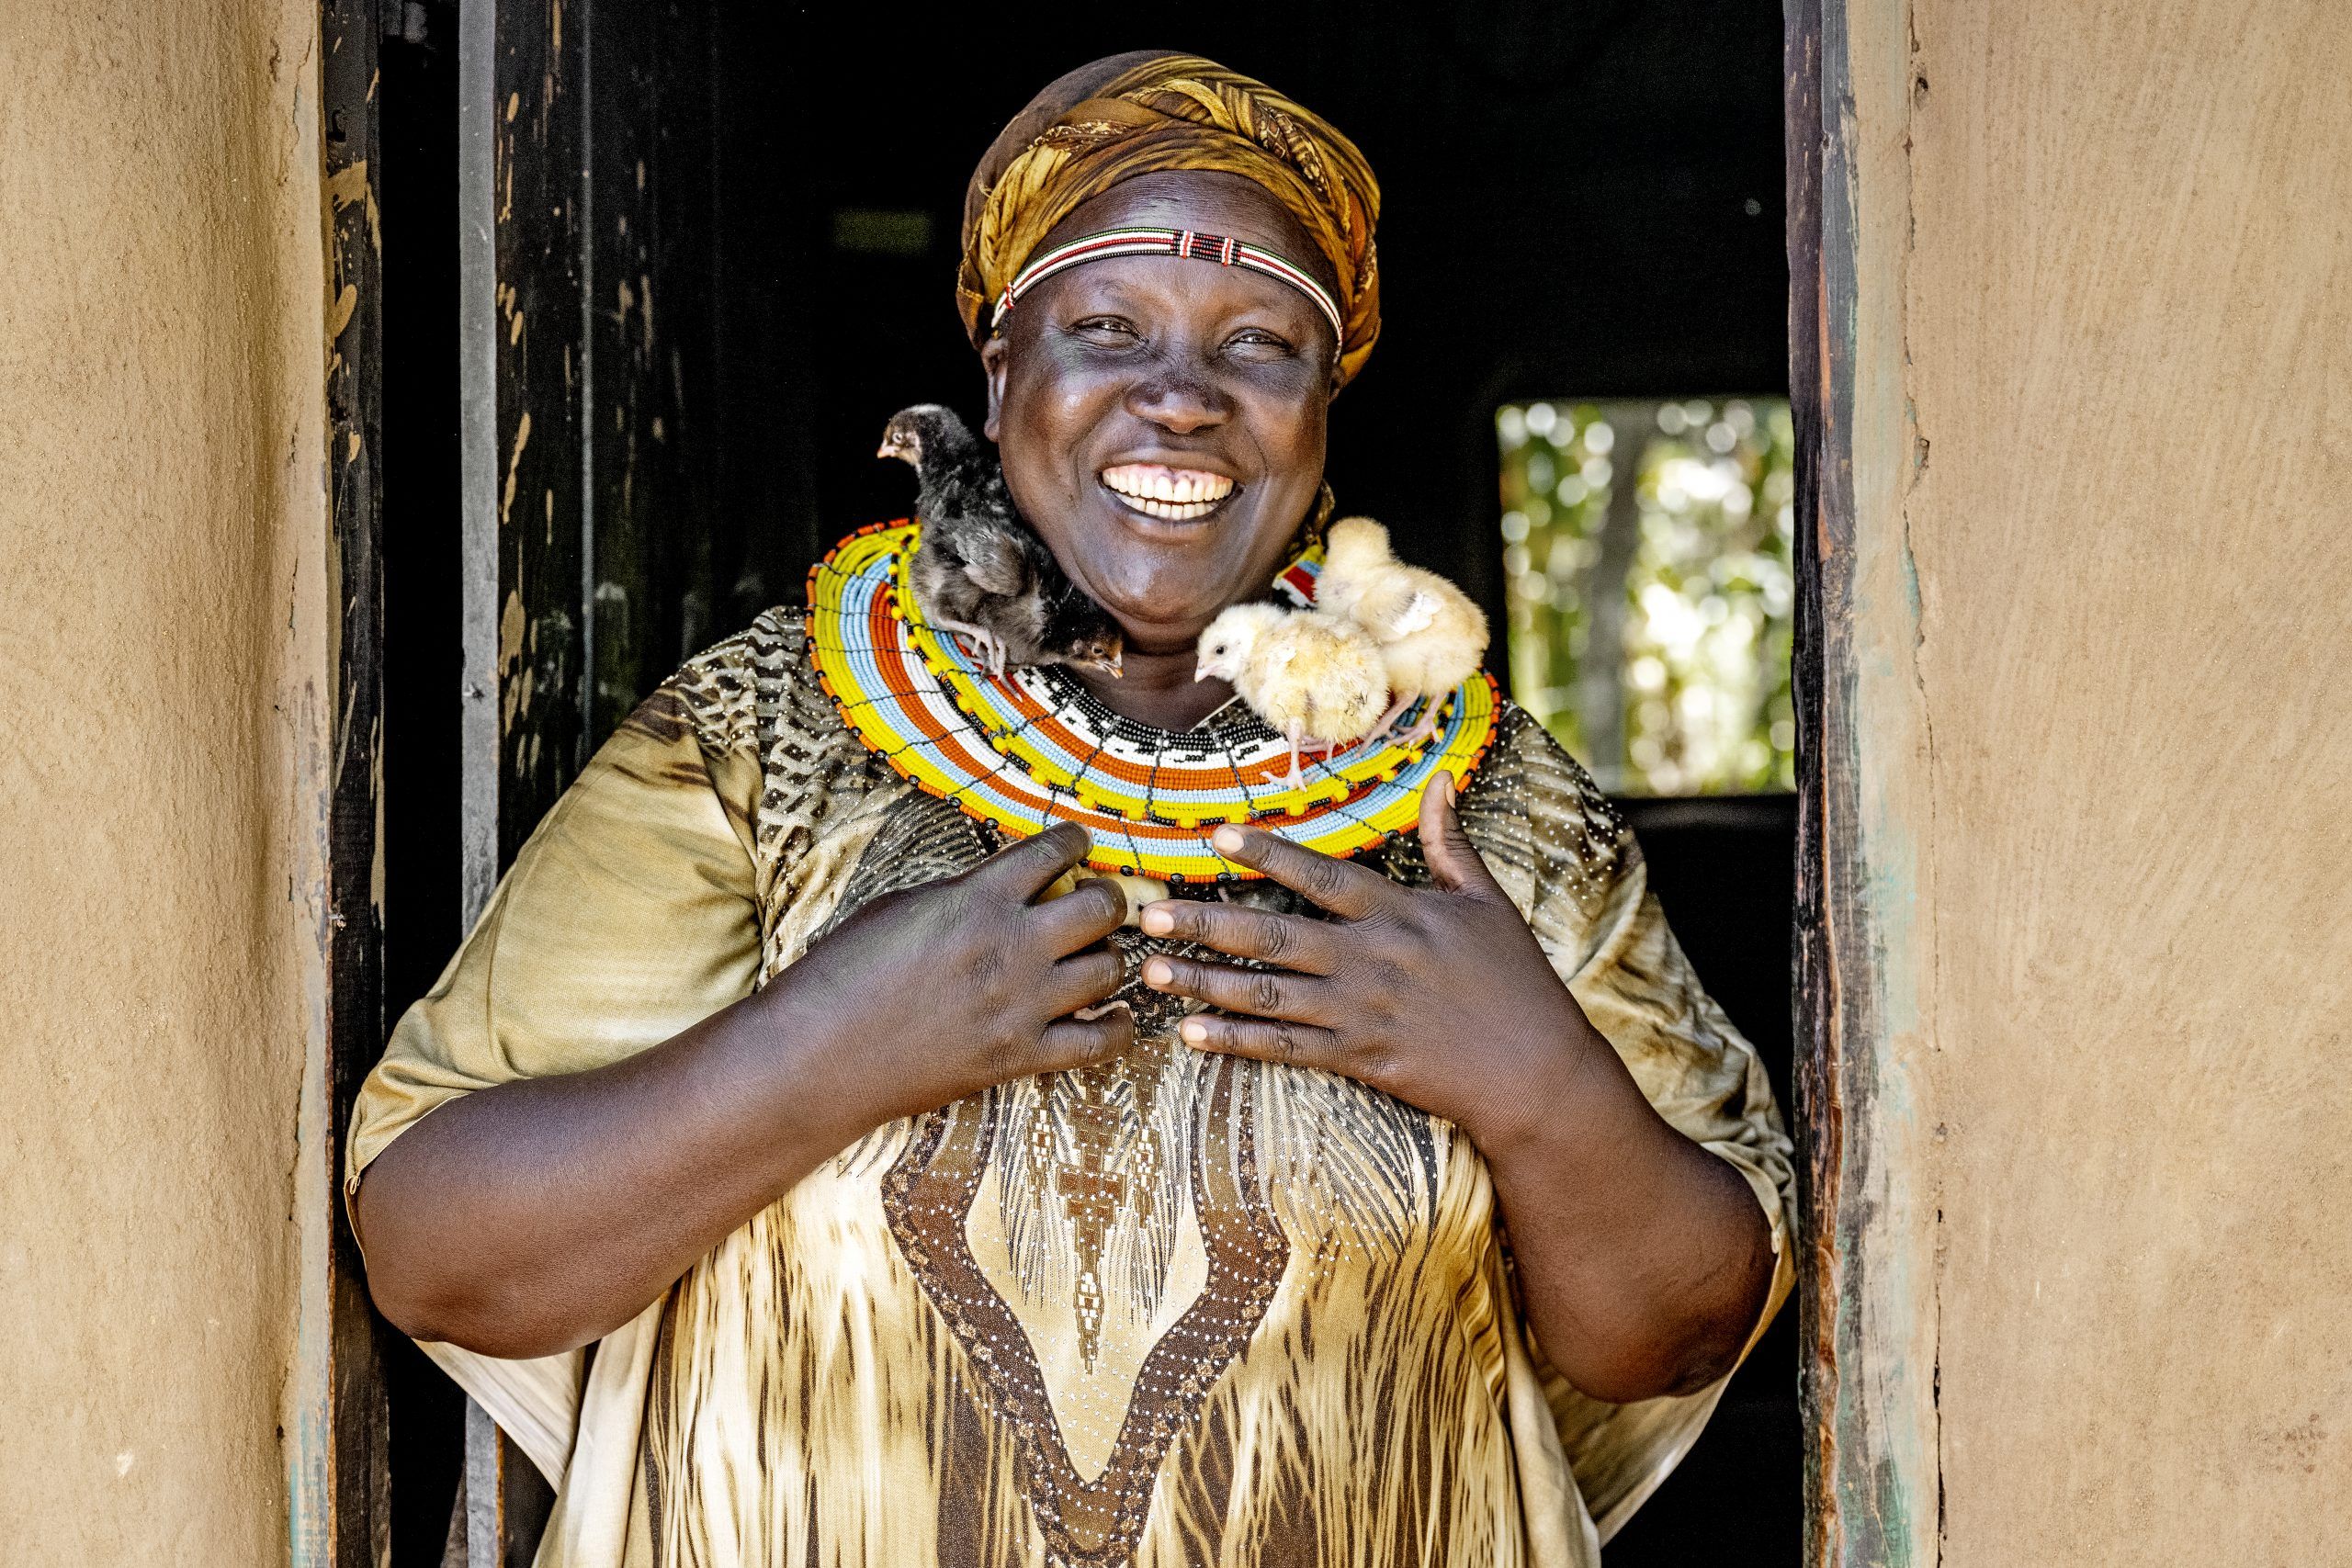 Lucy from Kenya is smiling with chickens around her neck